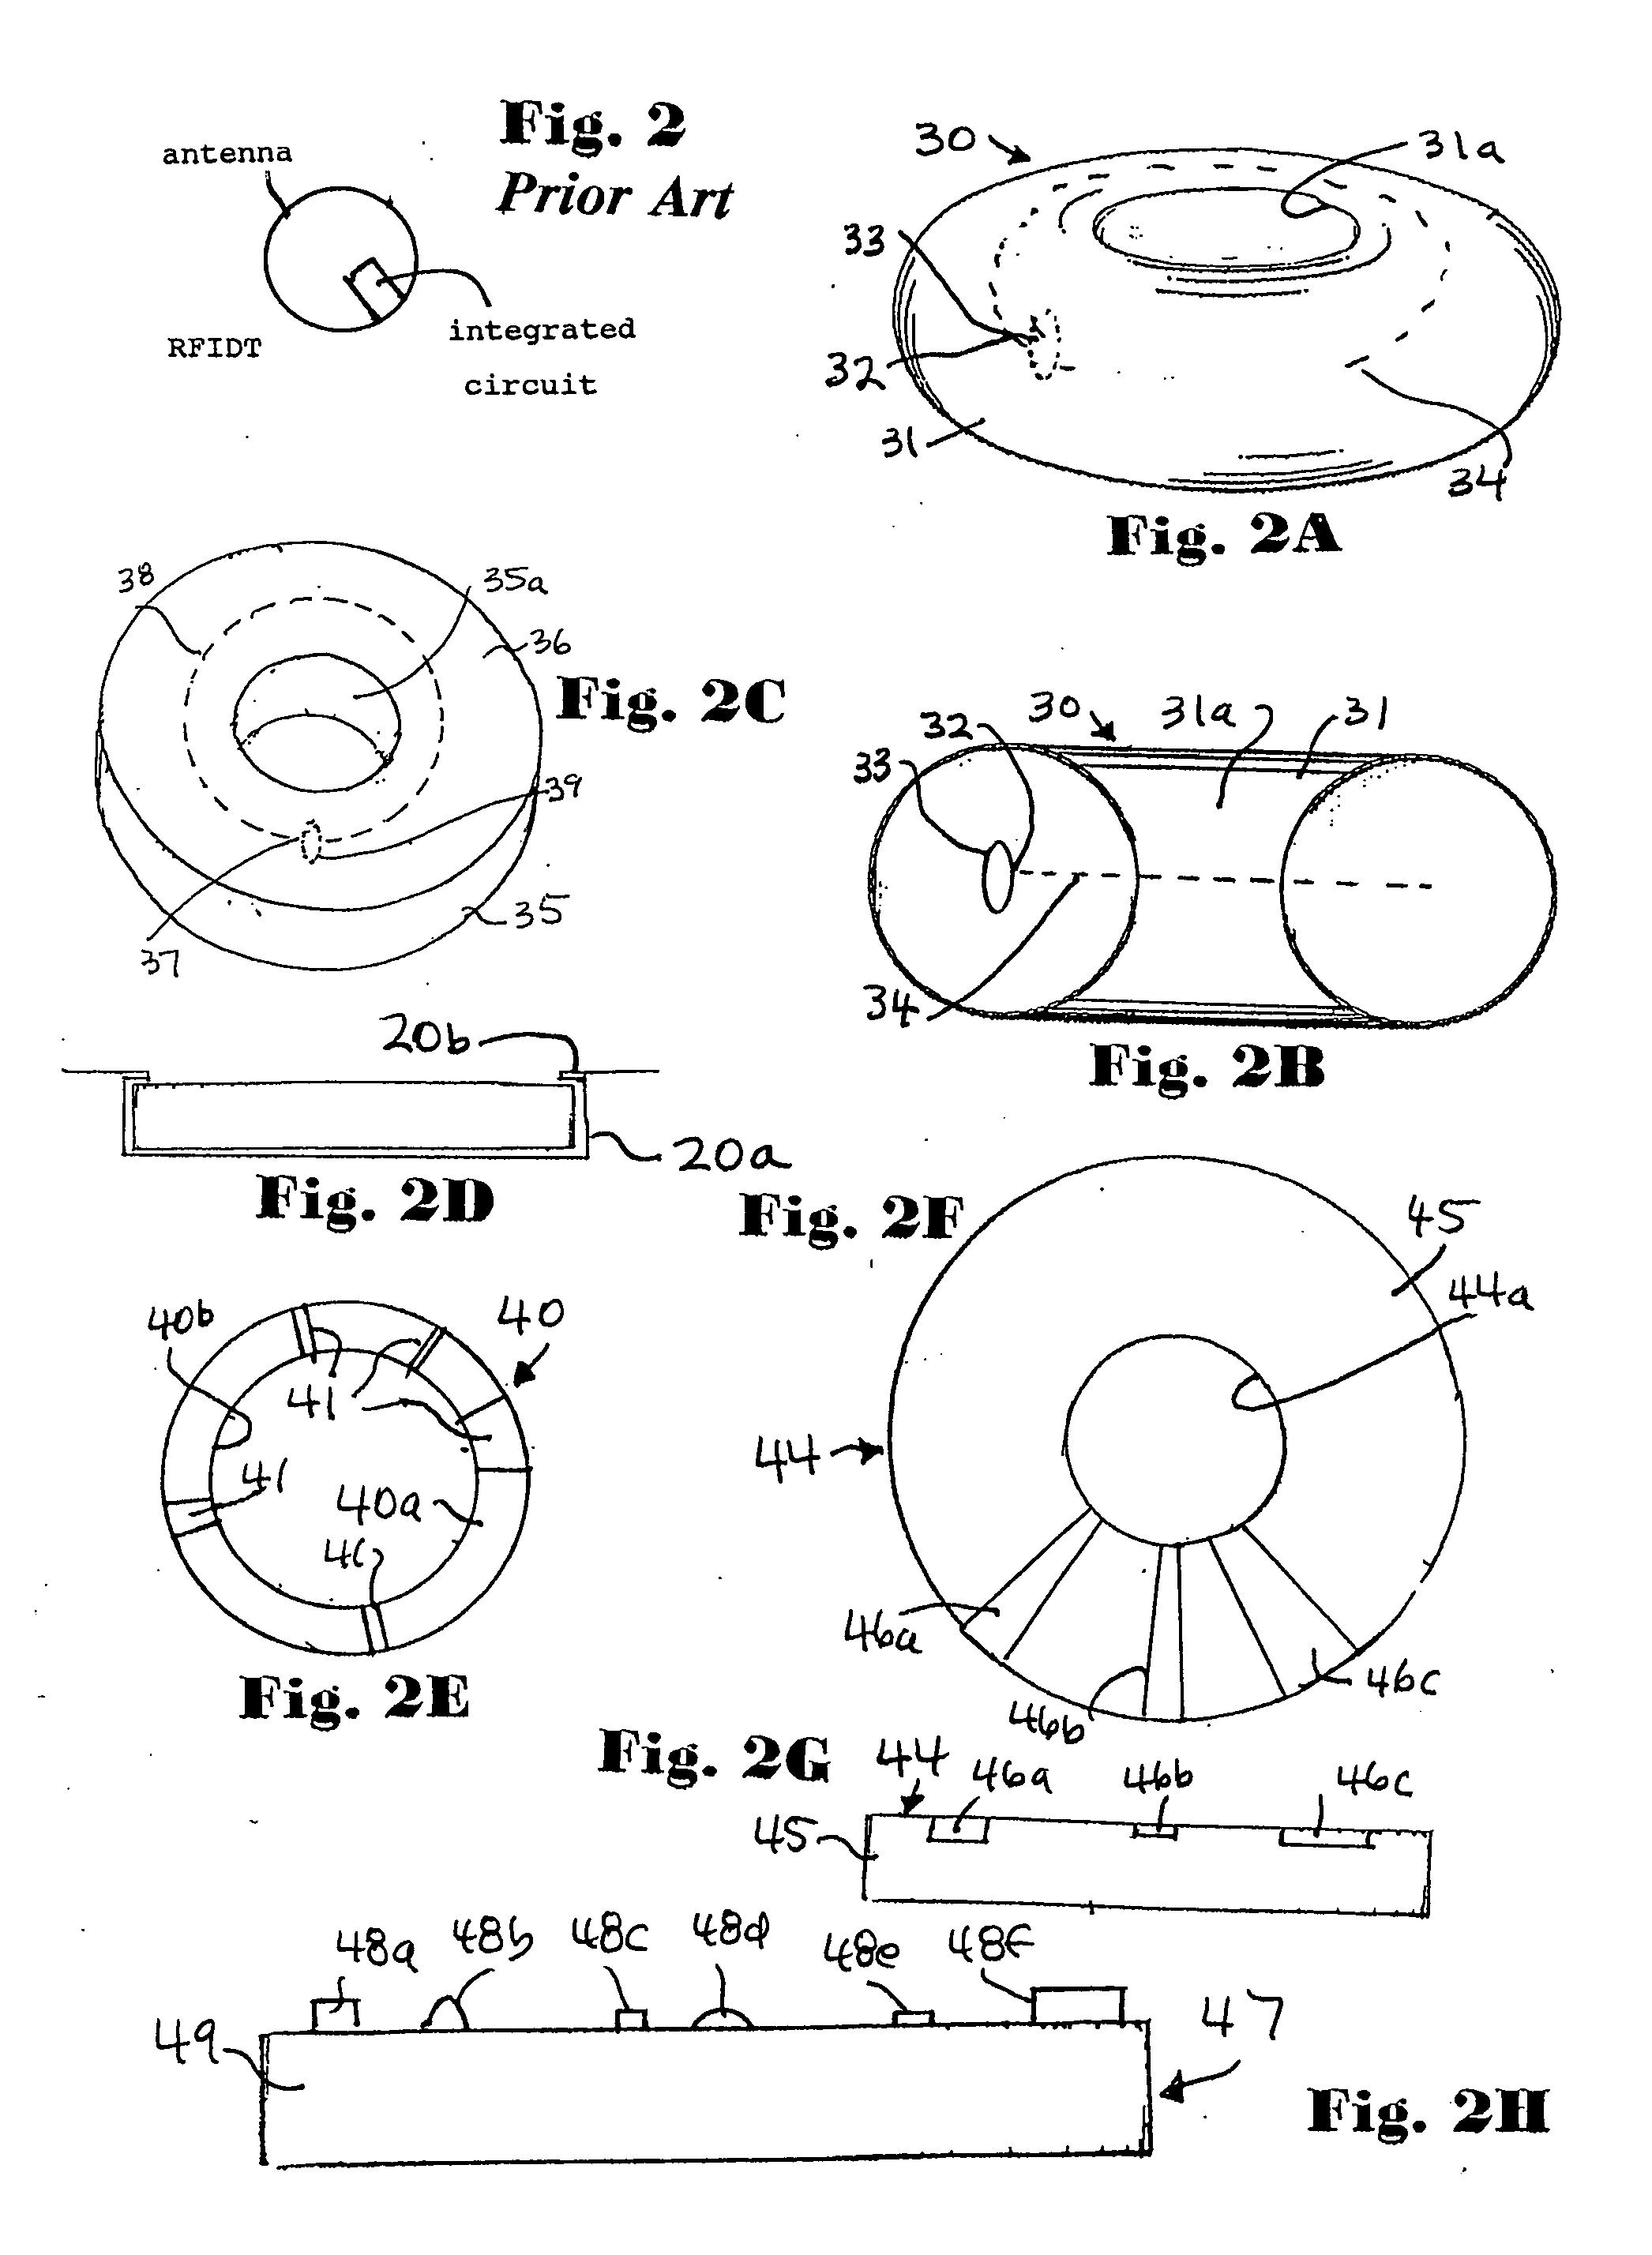 Apparatus identification systems and methods